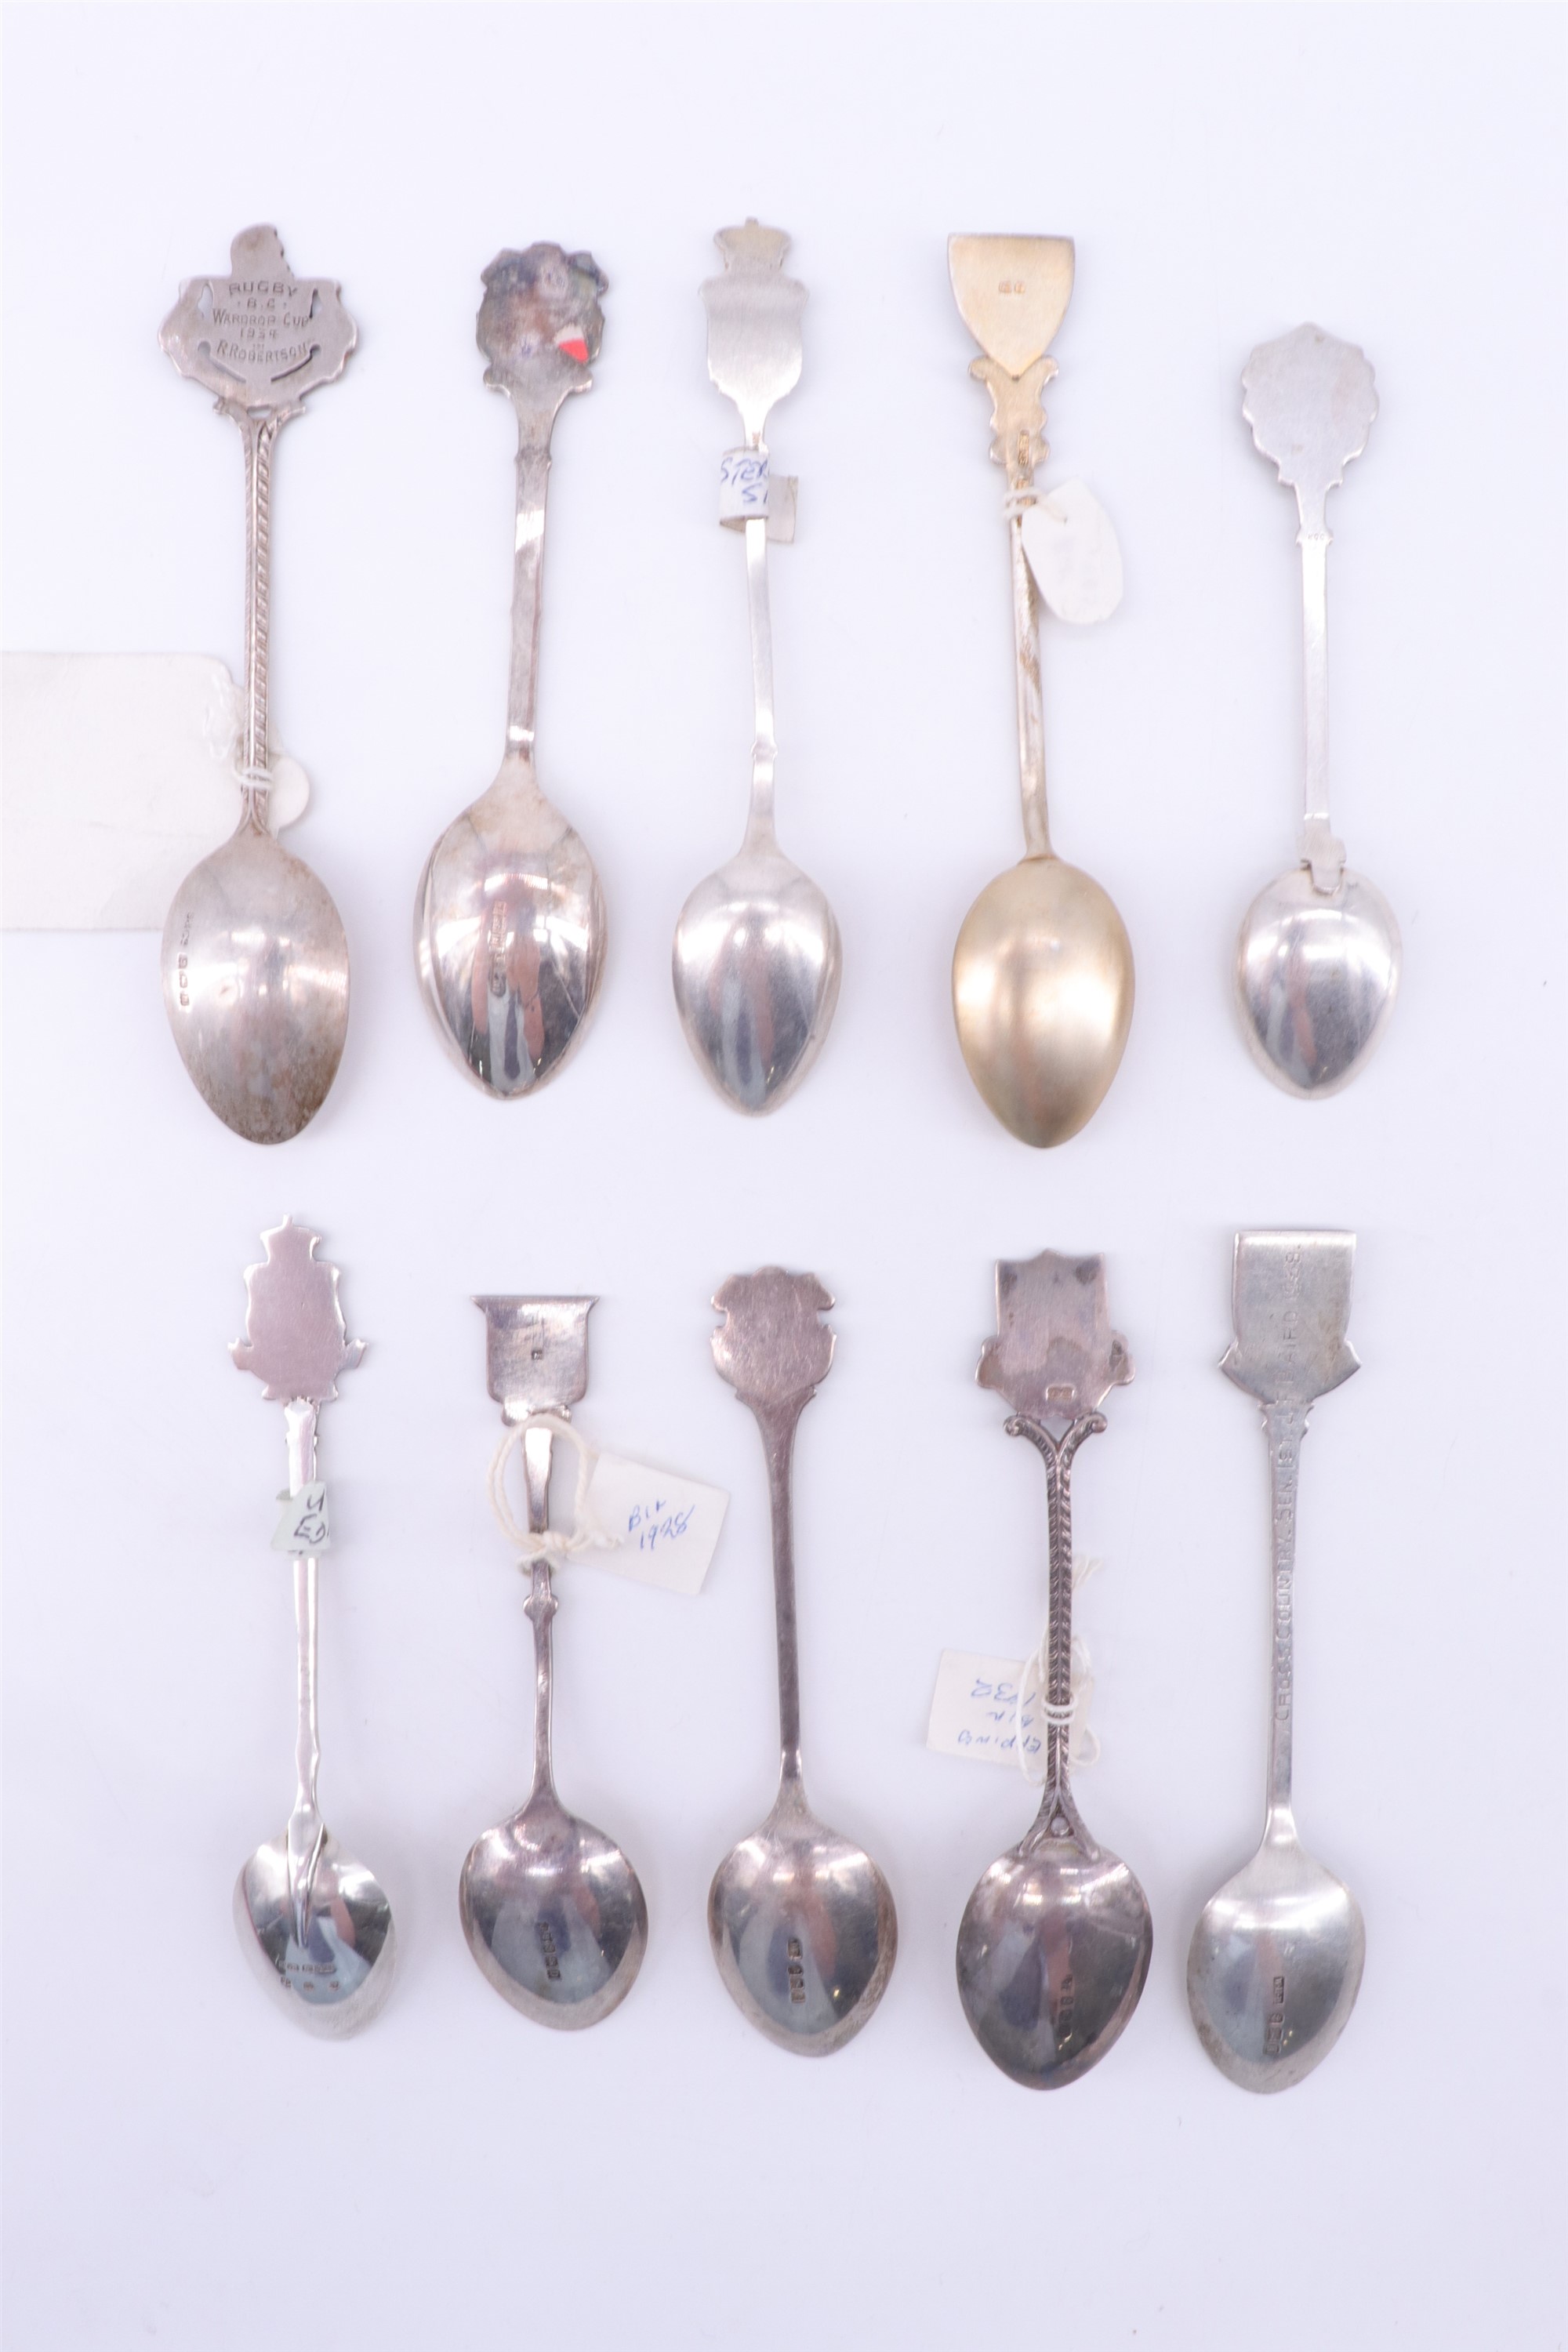 Eight enamelled silver souvenir teaspoons, relating to rugby, cross country running etc, together - Image 2 of 2